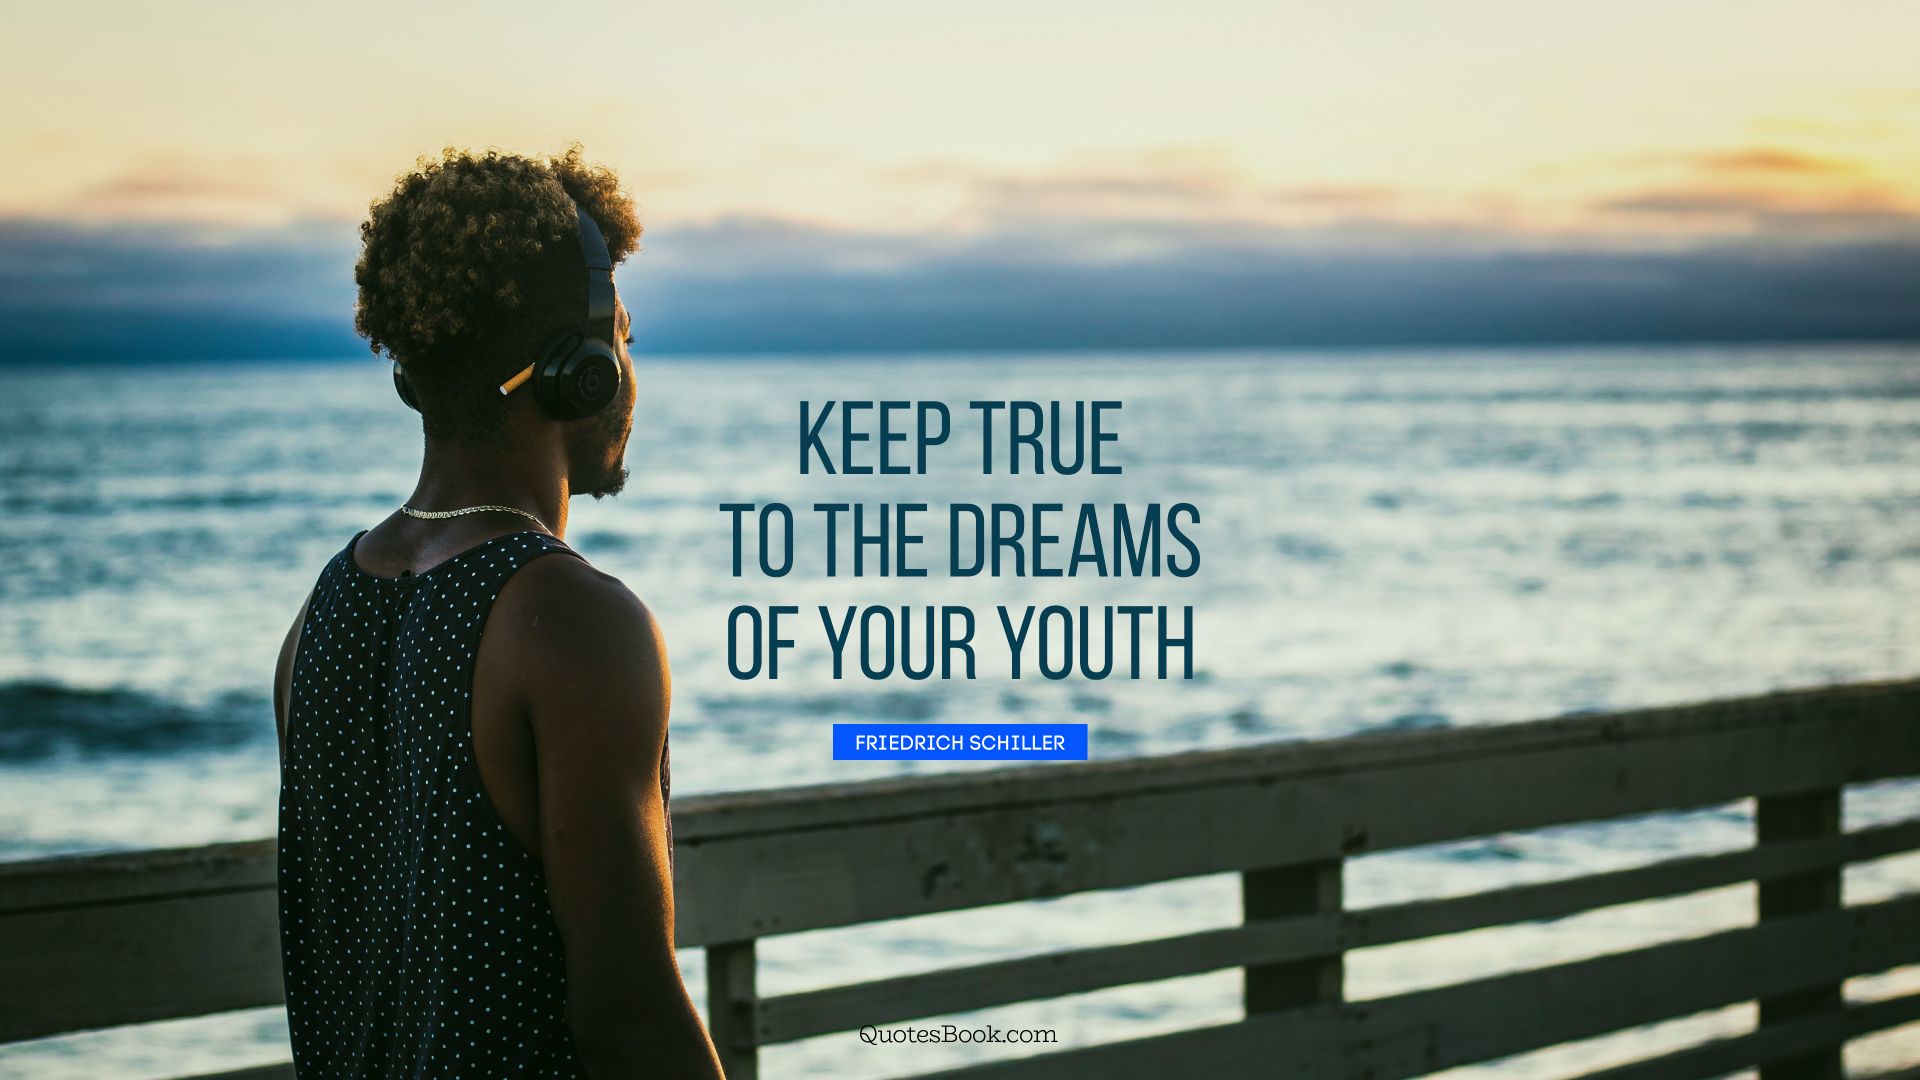 Keep true to the dreams of your youth. - Quote by Friedrich Schiller